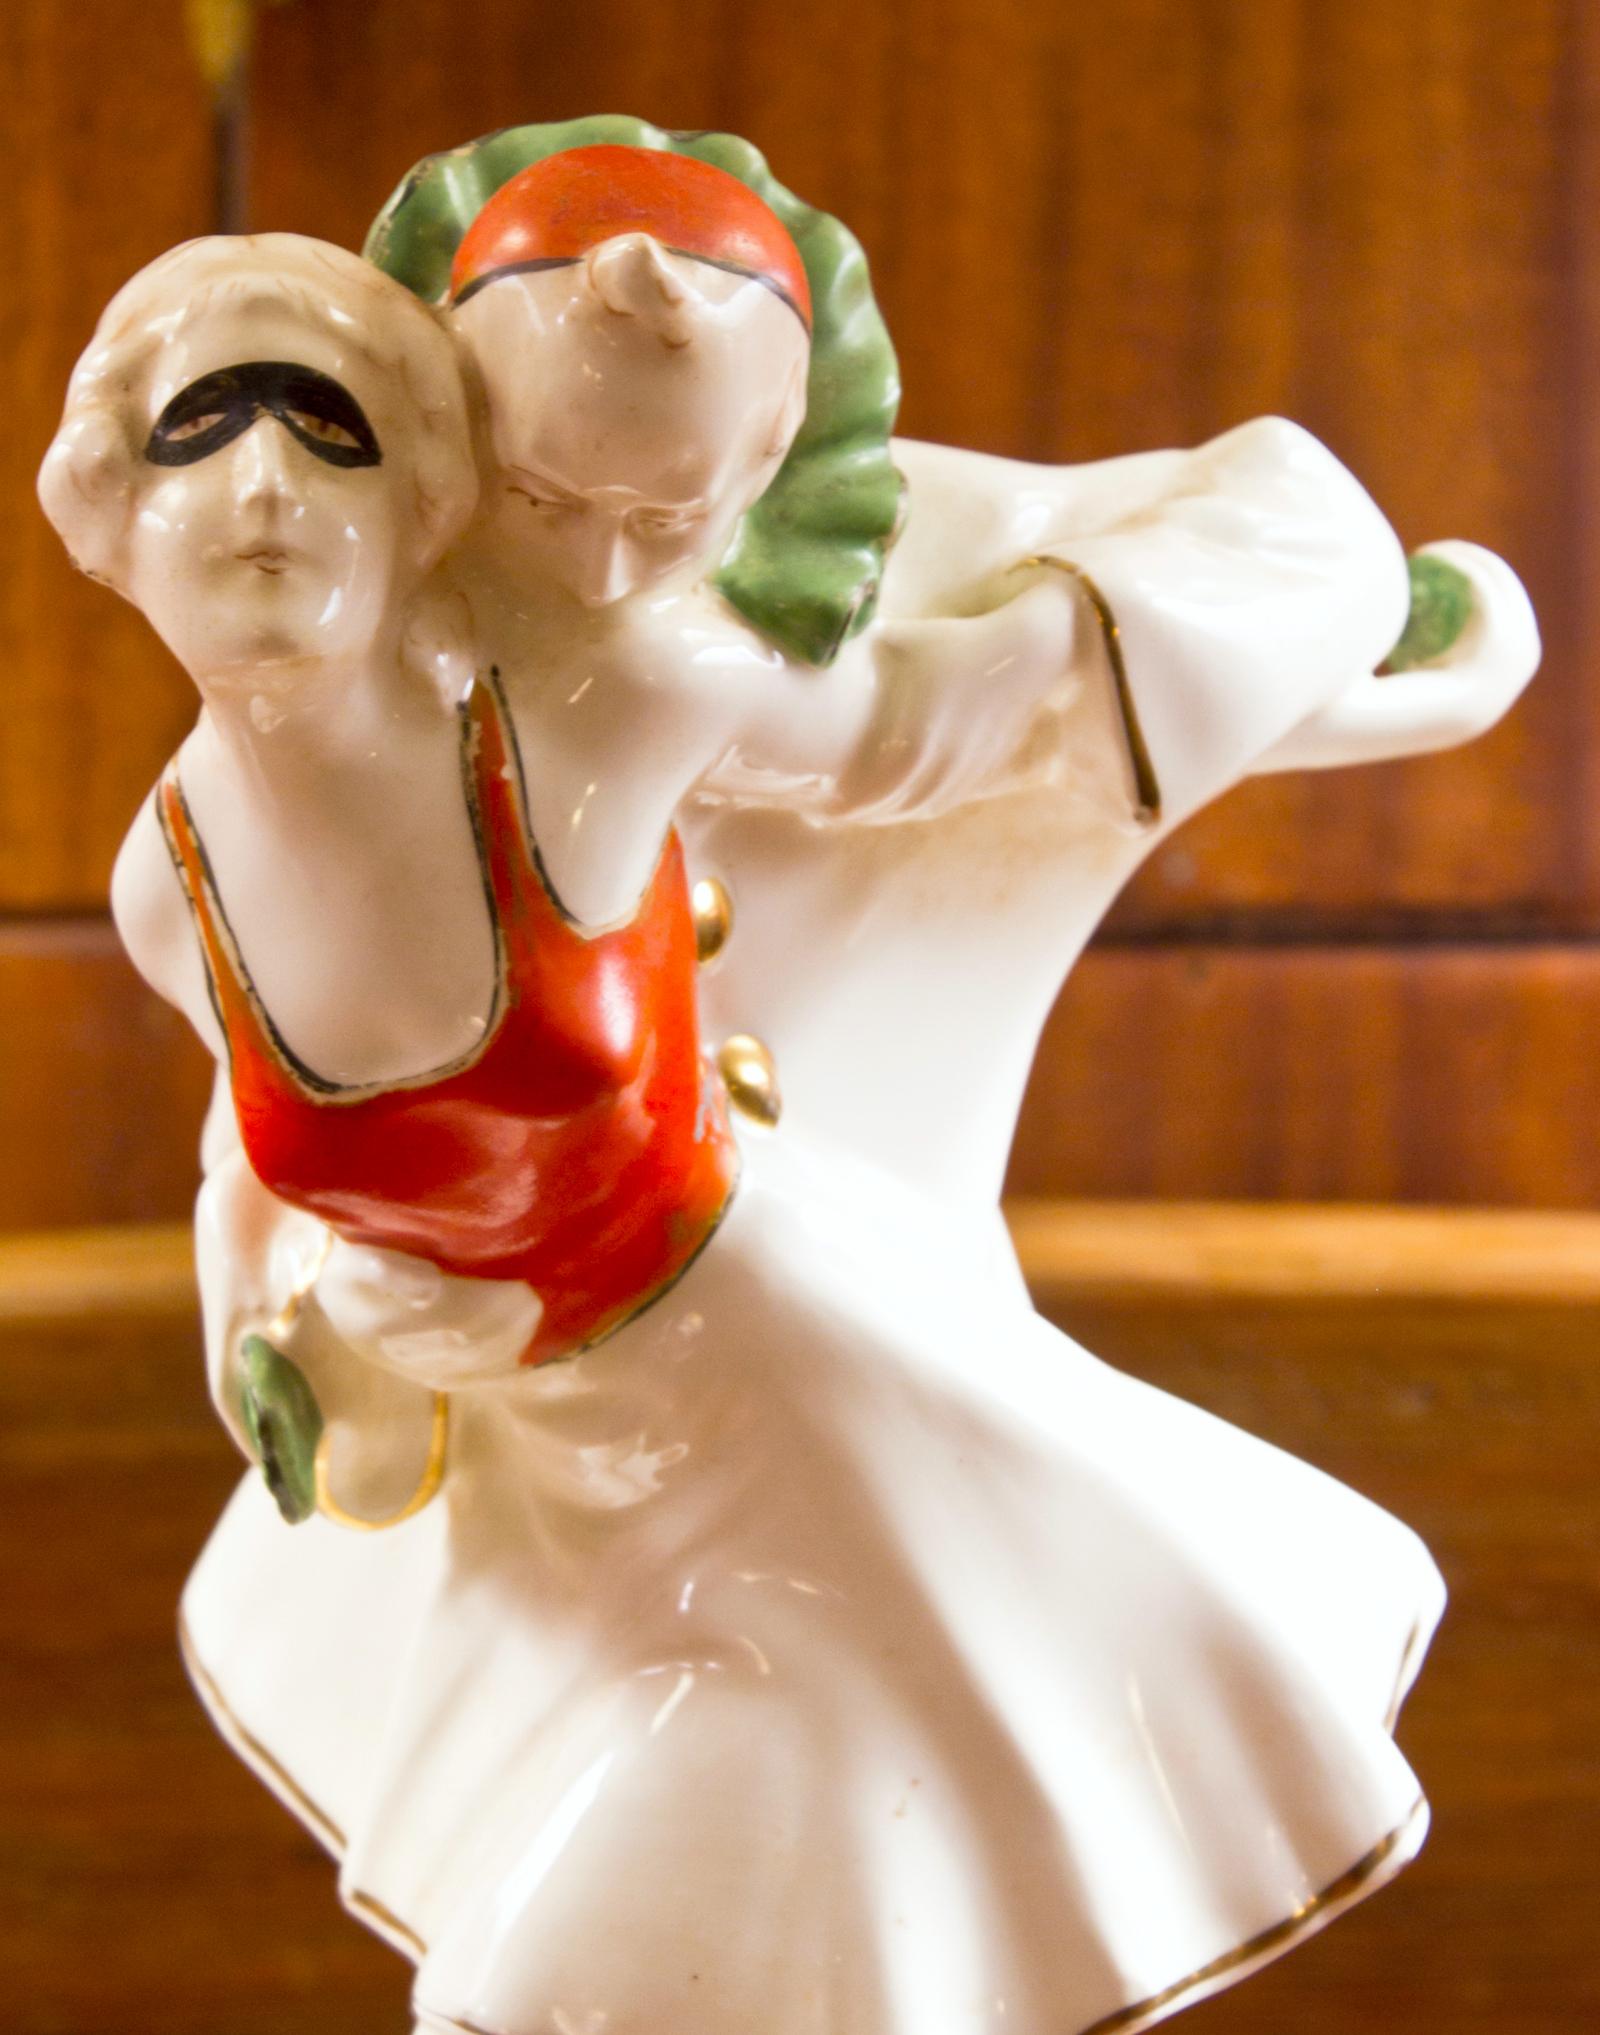 Czechoslovakian porcelain piece depicting a dancing Pierrot and Pierrette couple. Classic Art Deco in color and style. Mark on the bottom of the figurine: 